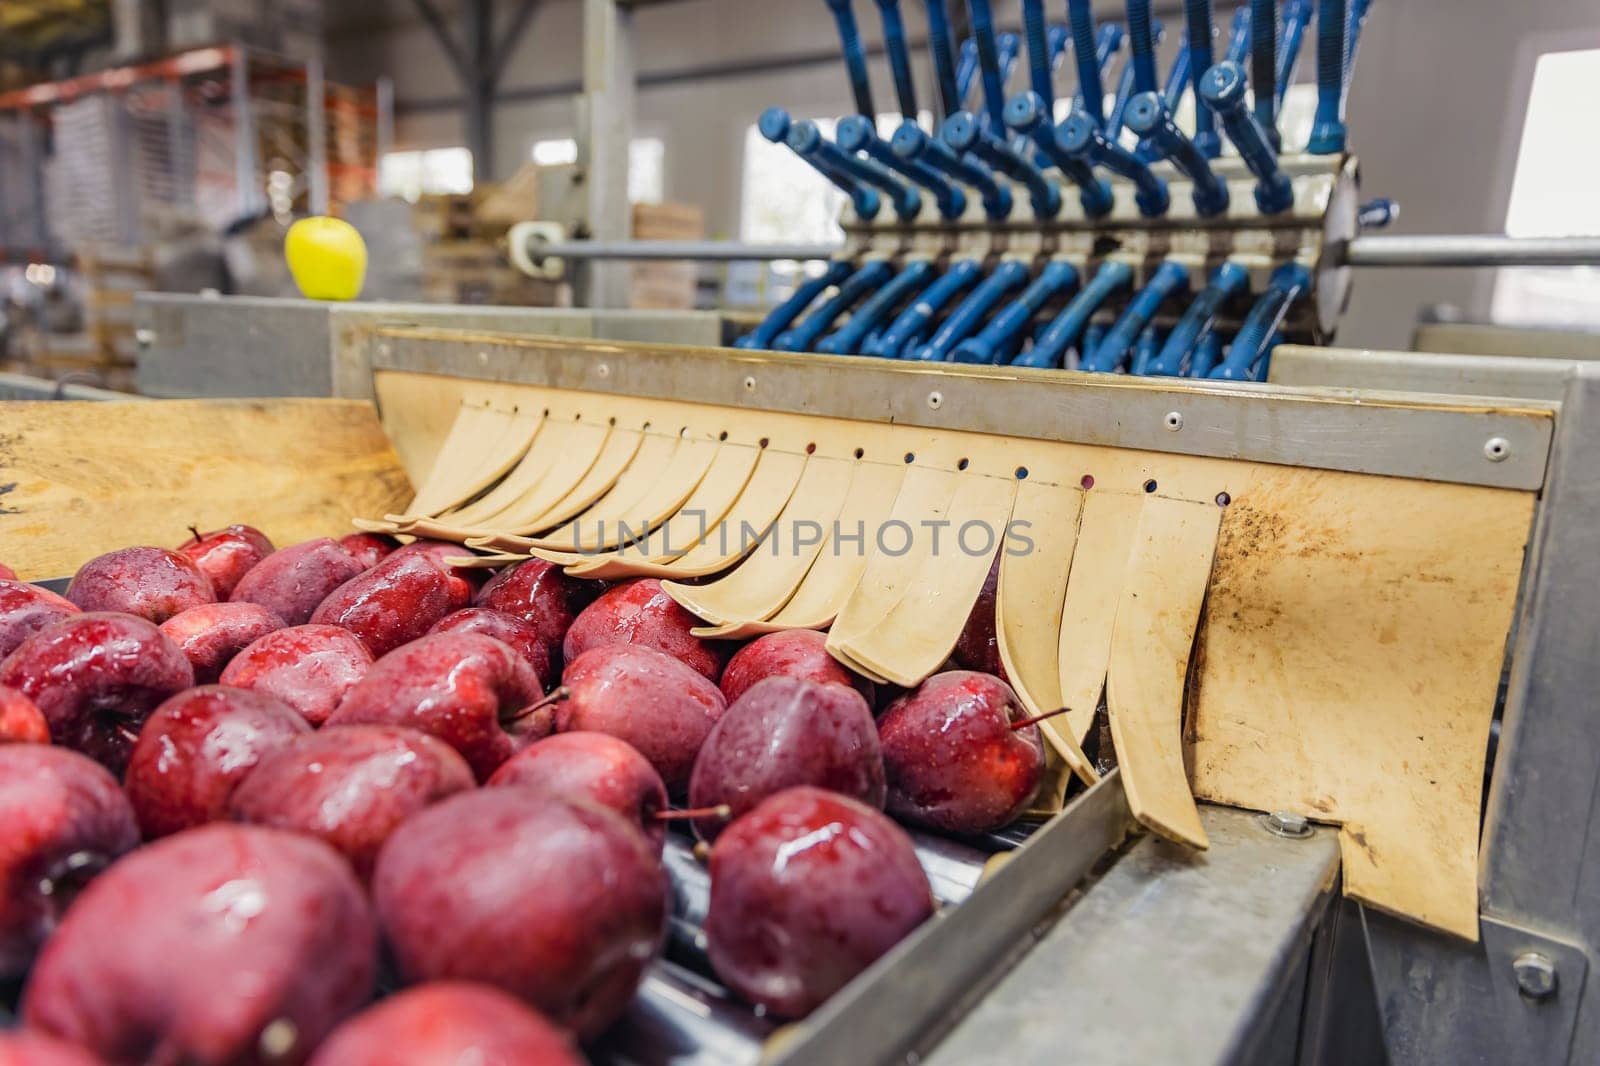 apples on an automatic line for selection and sorting